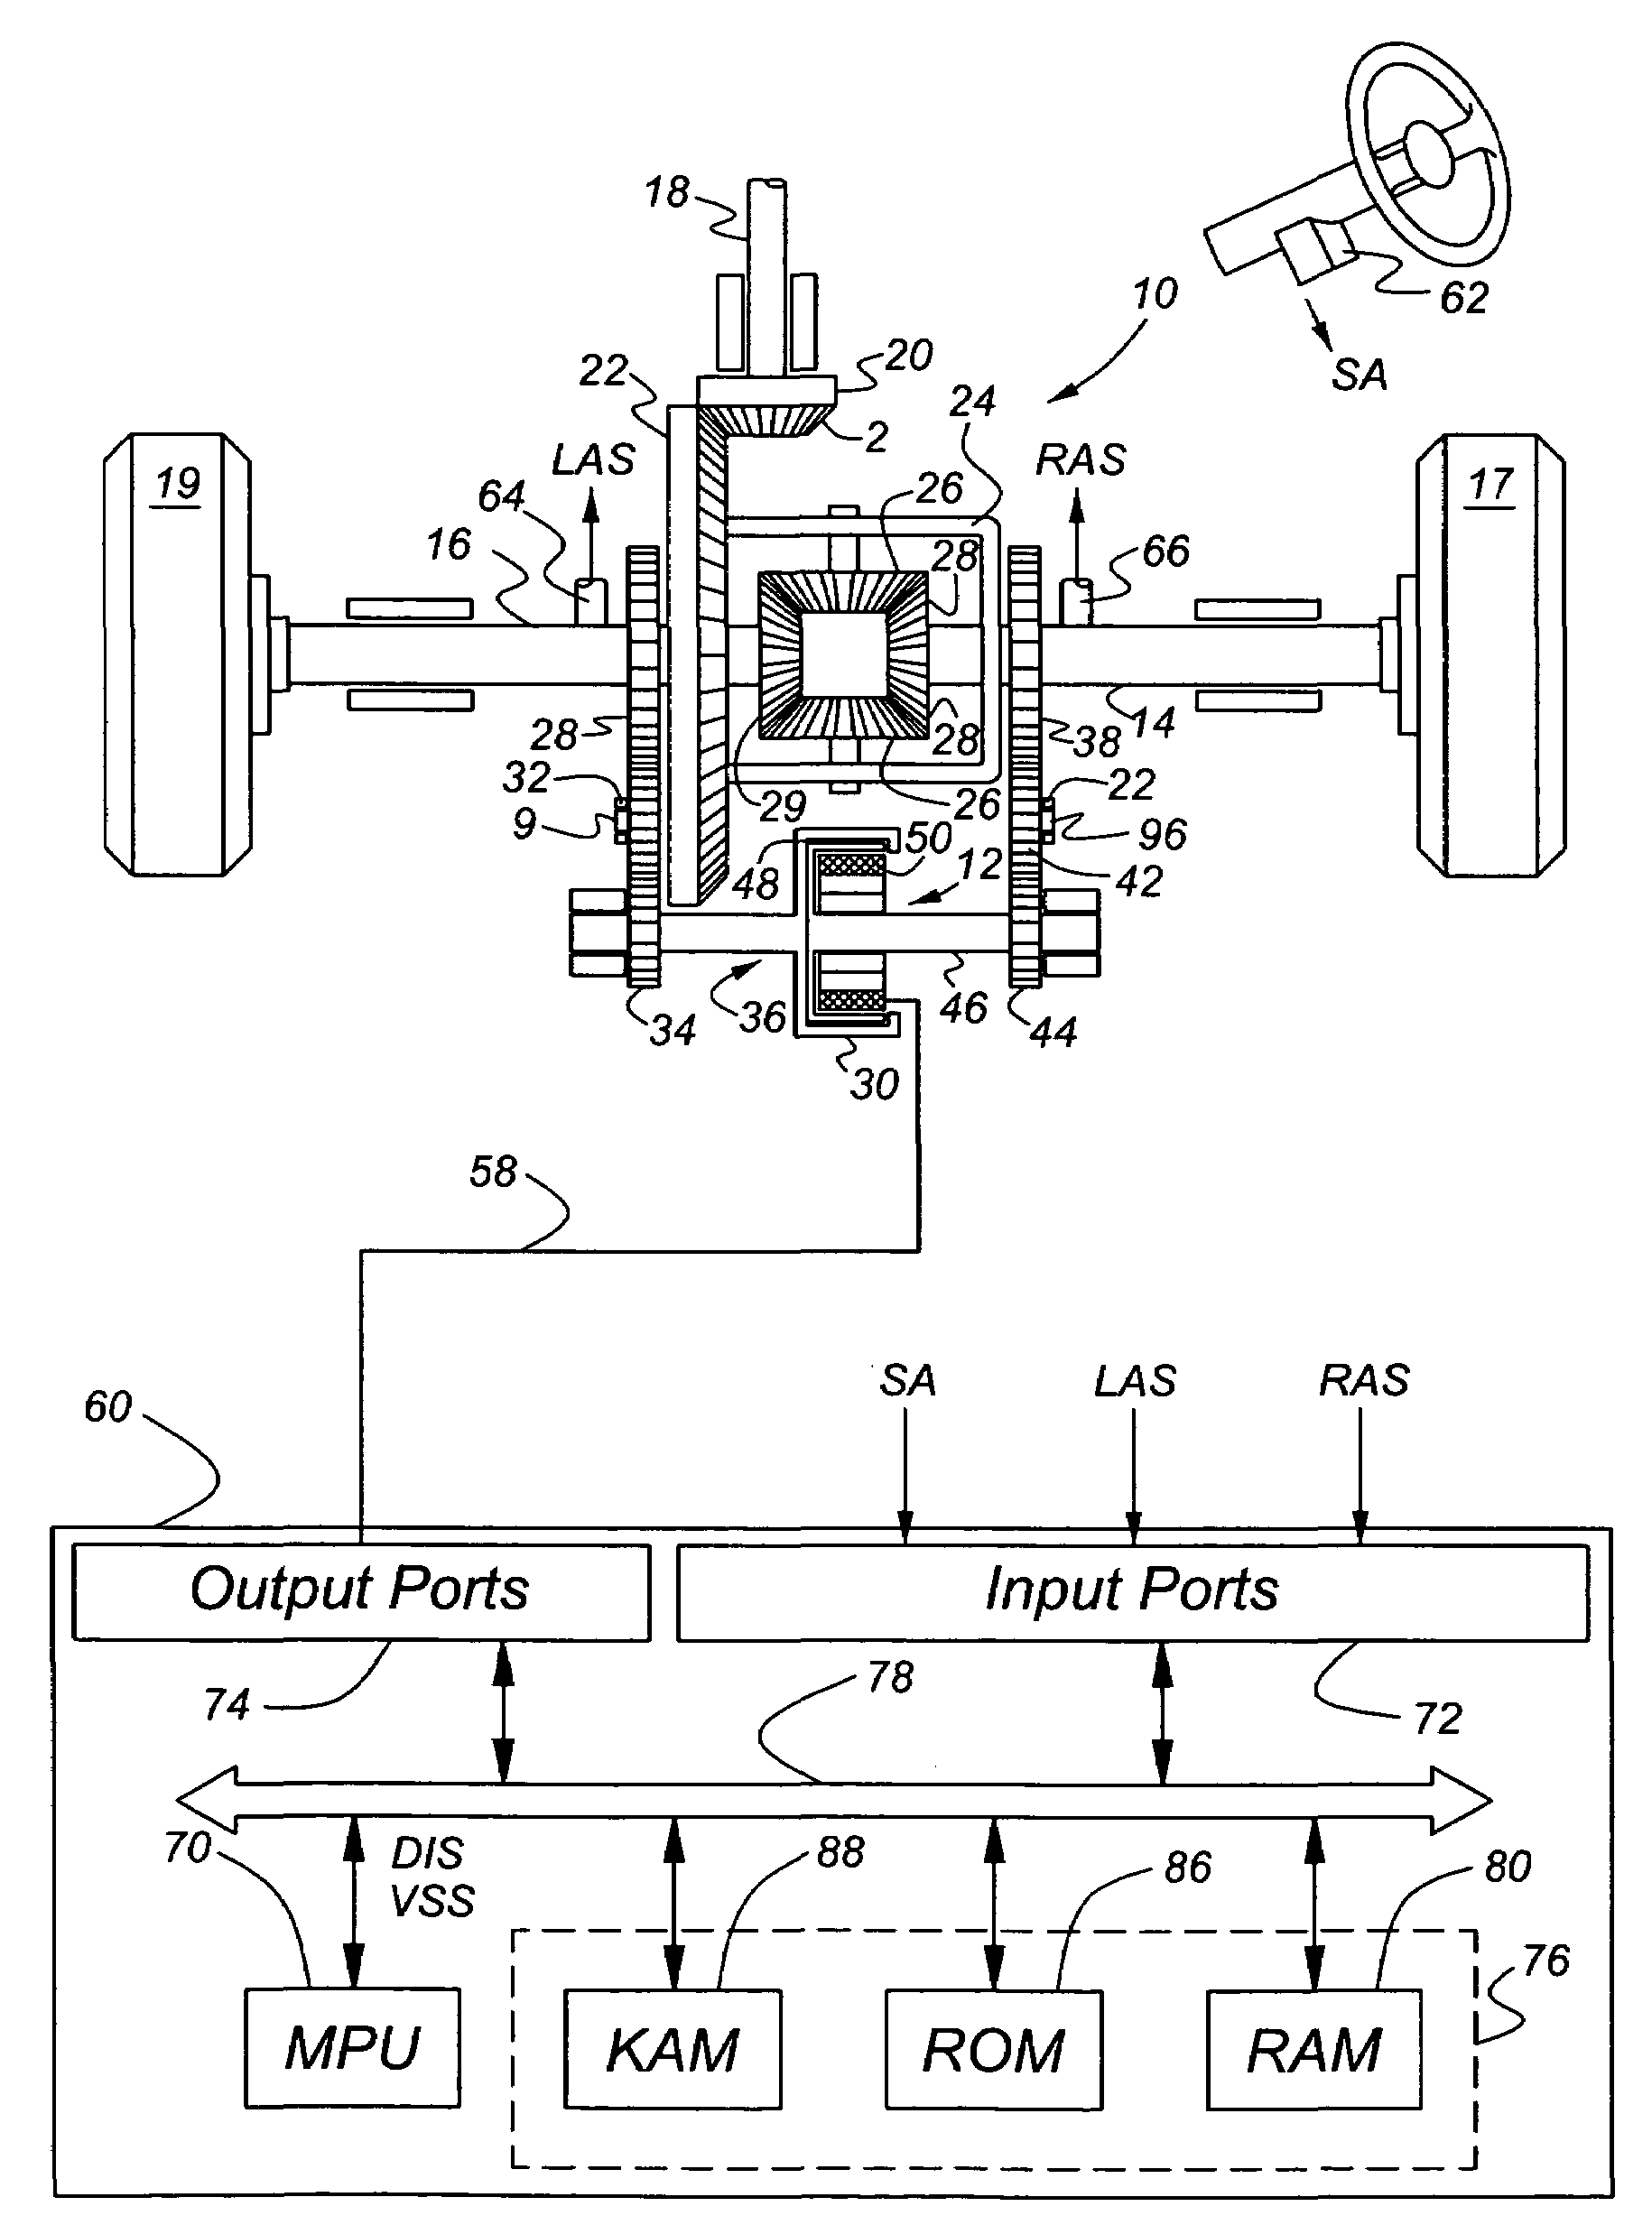 Magnetic powder torque transfer clutch for controlling slip across a differential mechanism